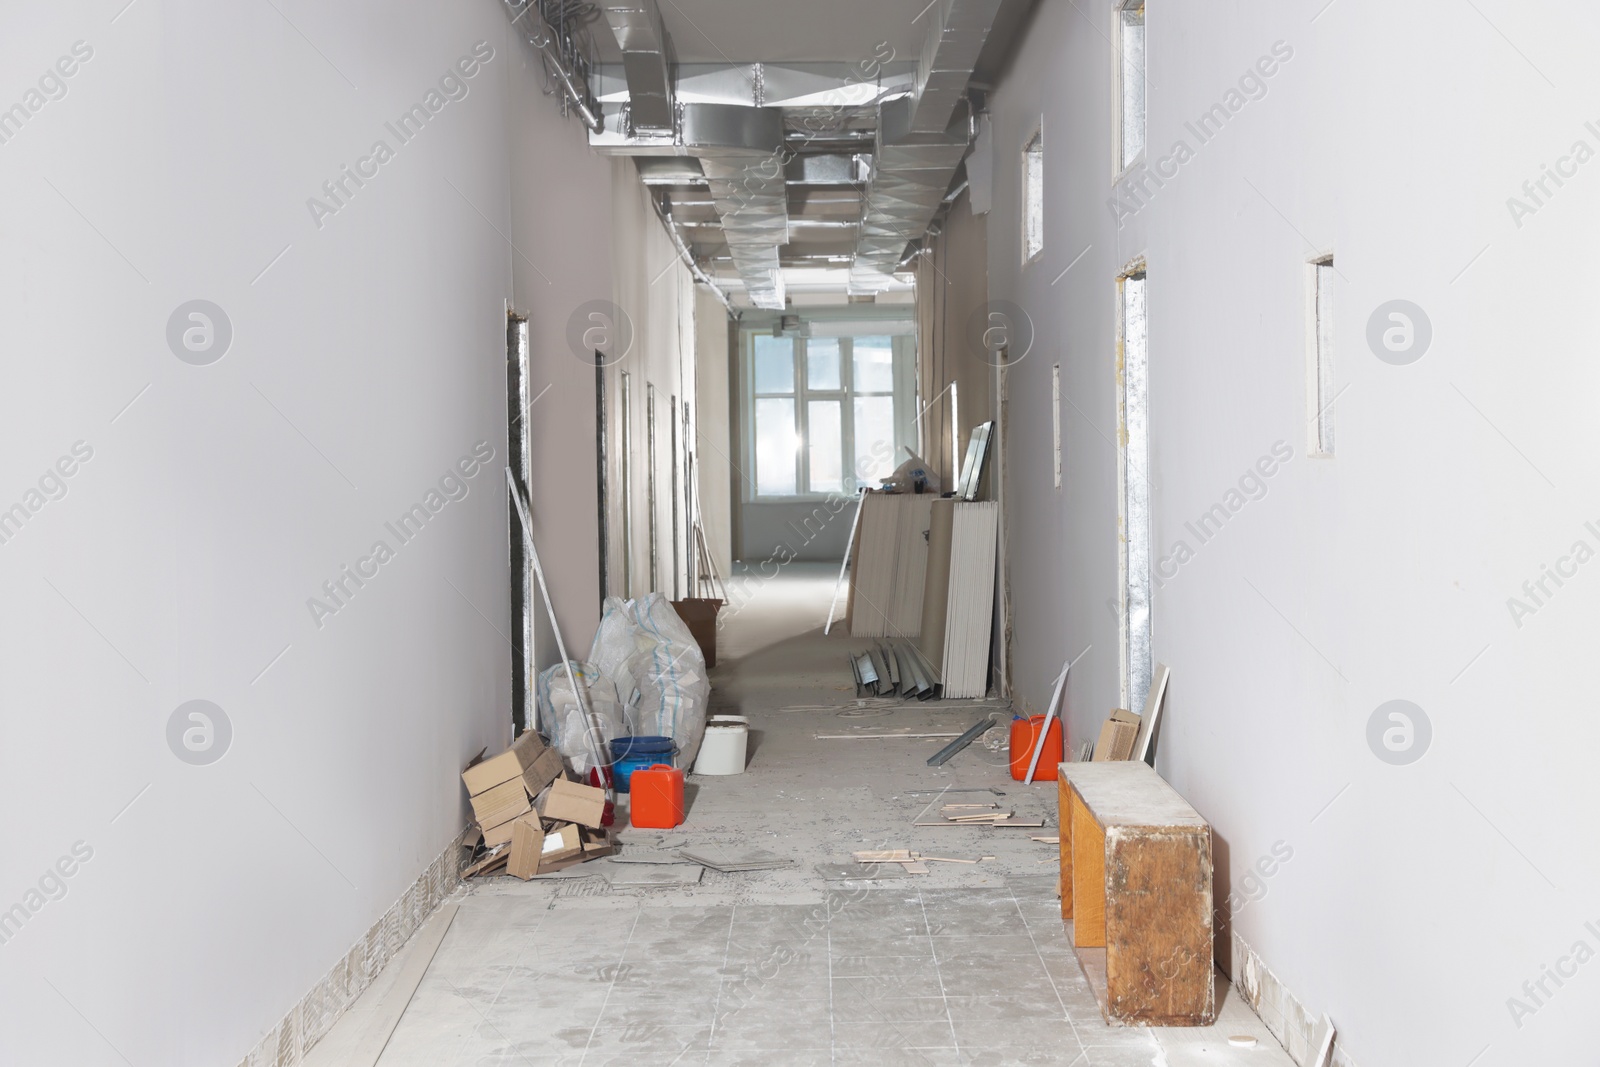 Photo of Hallway in building during repair. House renovation